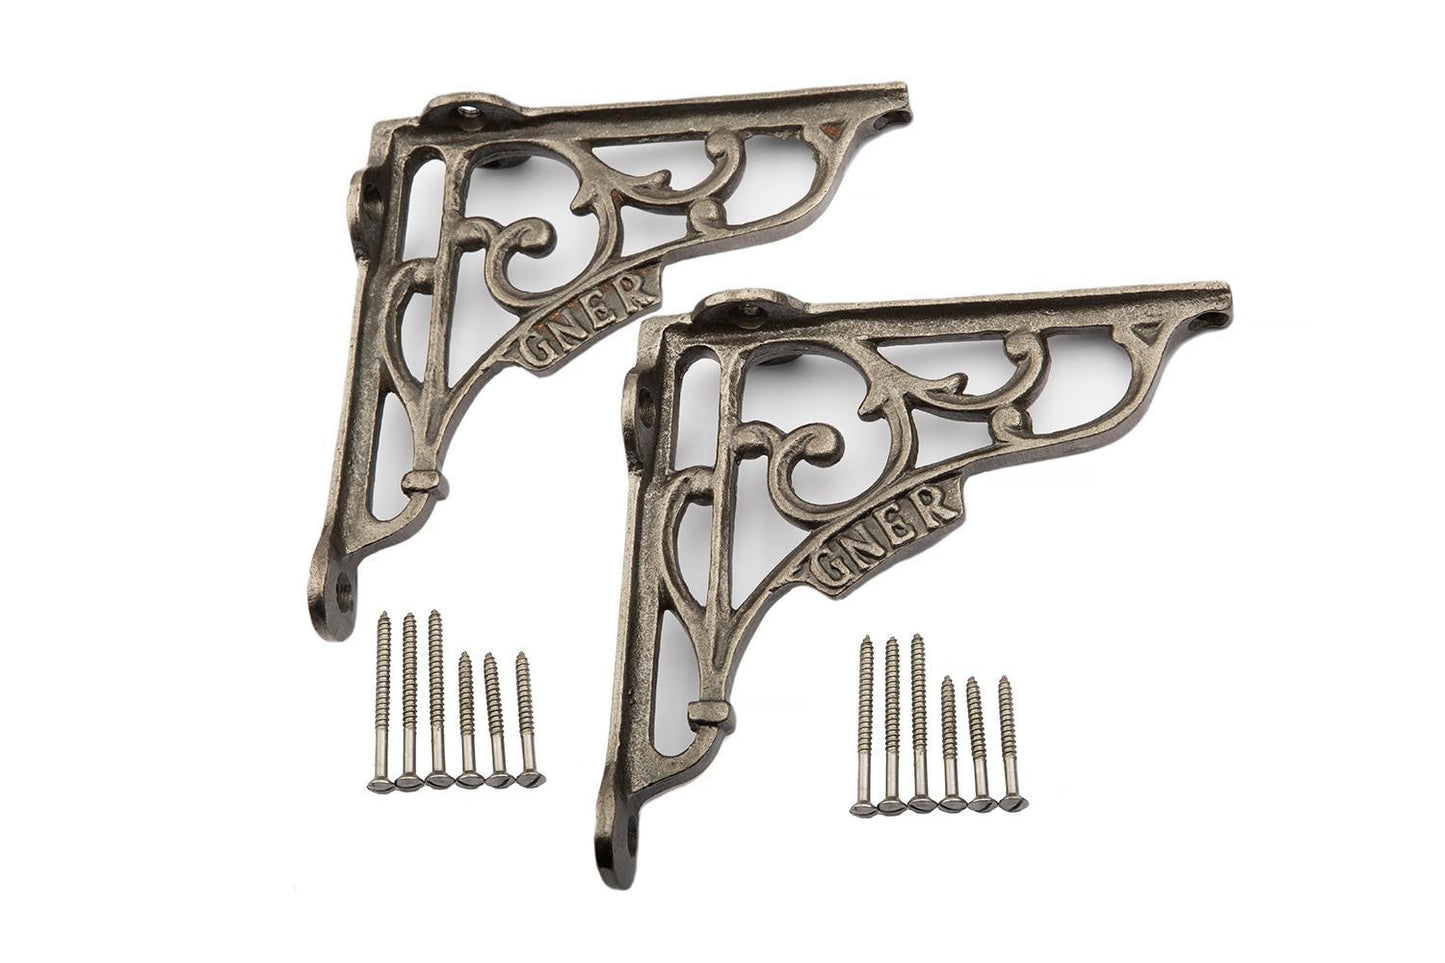 6x6 Pair of Cast Iron Wall Shelf Brackets GNER Steam Railway Carriage Supplied with fixing screws